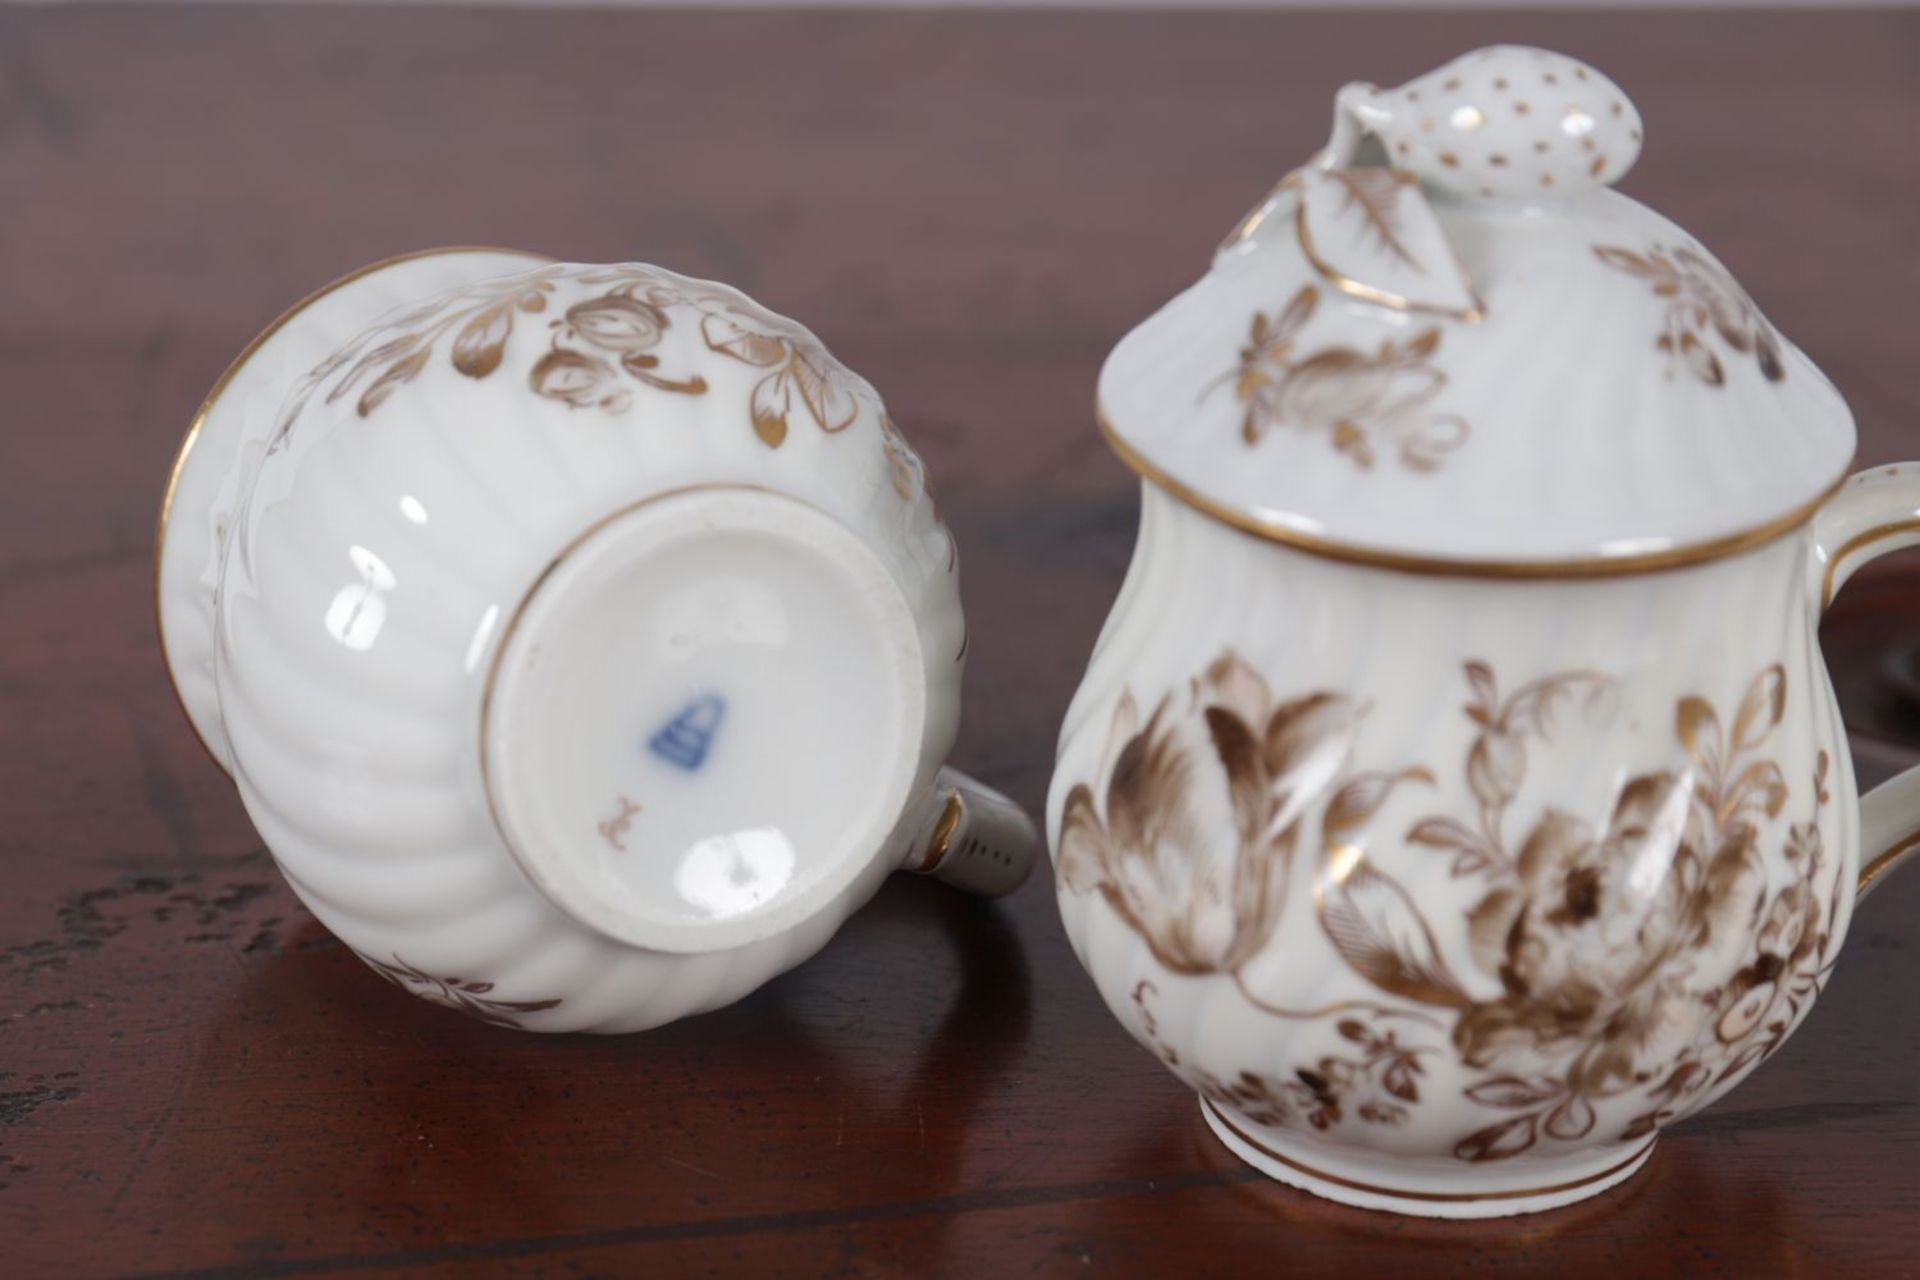 SET OF 4 VIENNA PORCELAIN CHOCOLATE CUPS - Image 3 of 3